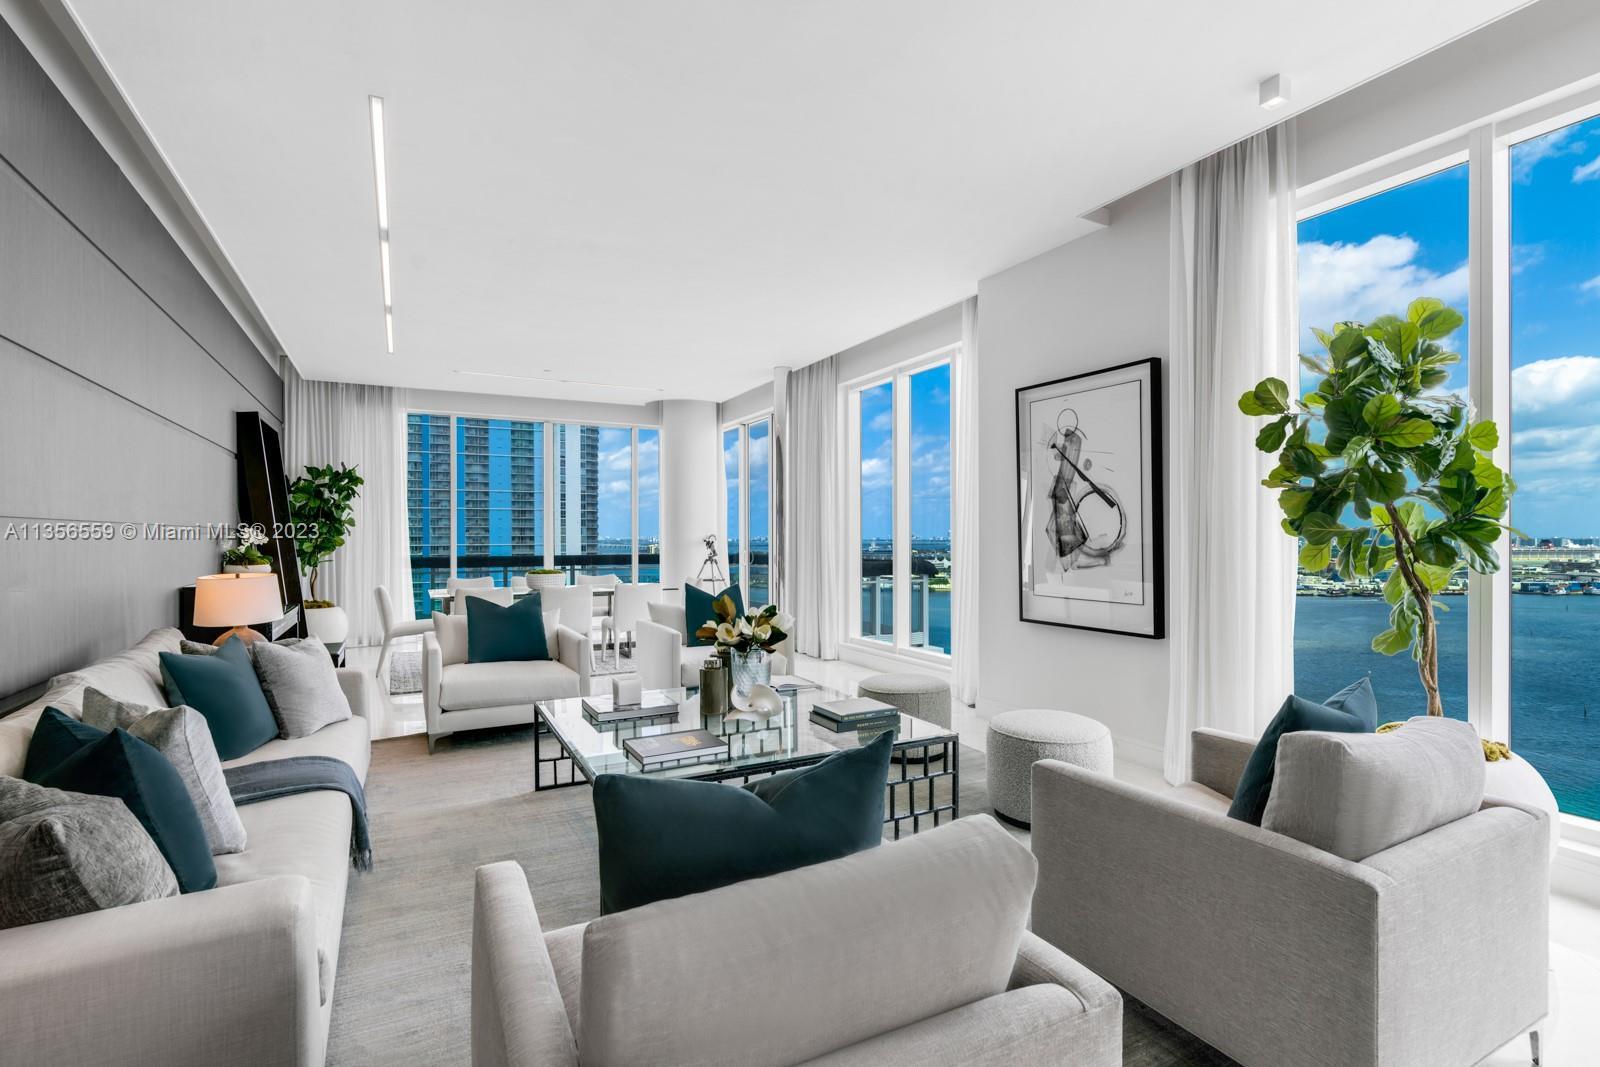 Step Inside With Me! Welcome to Asia - Brickell Key’s premier address. The coveted '03' line is the 